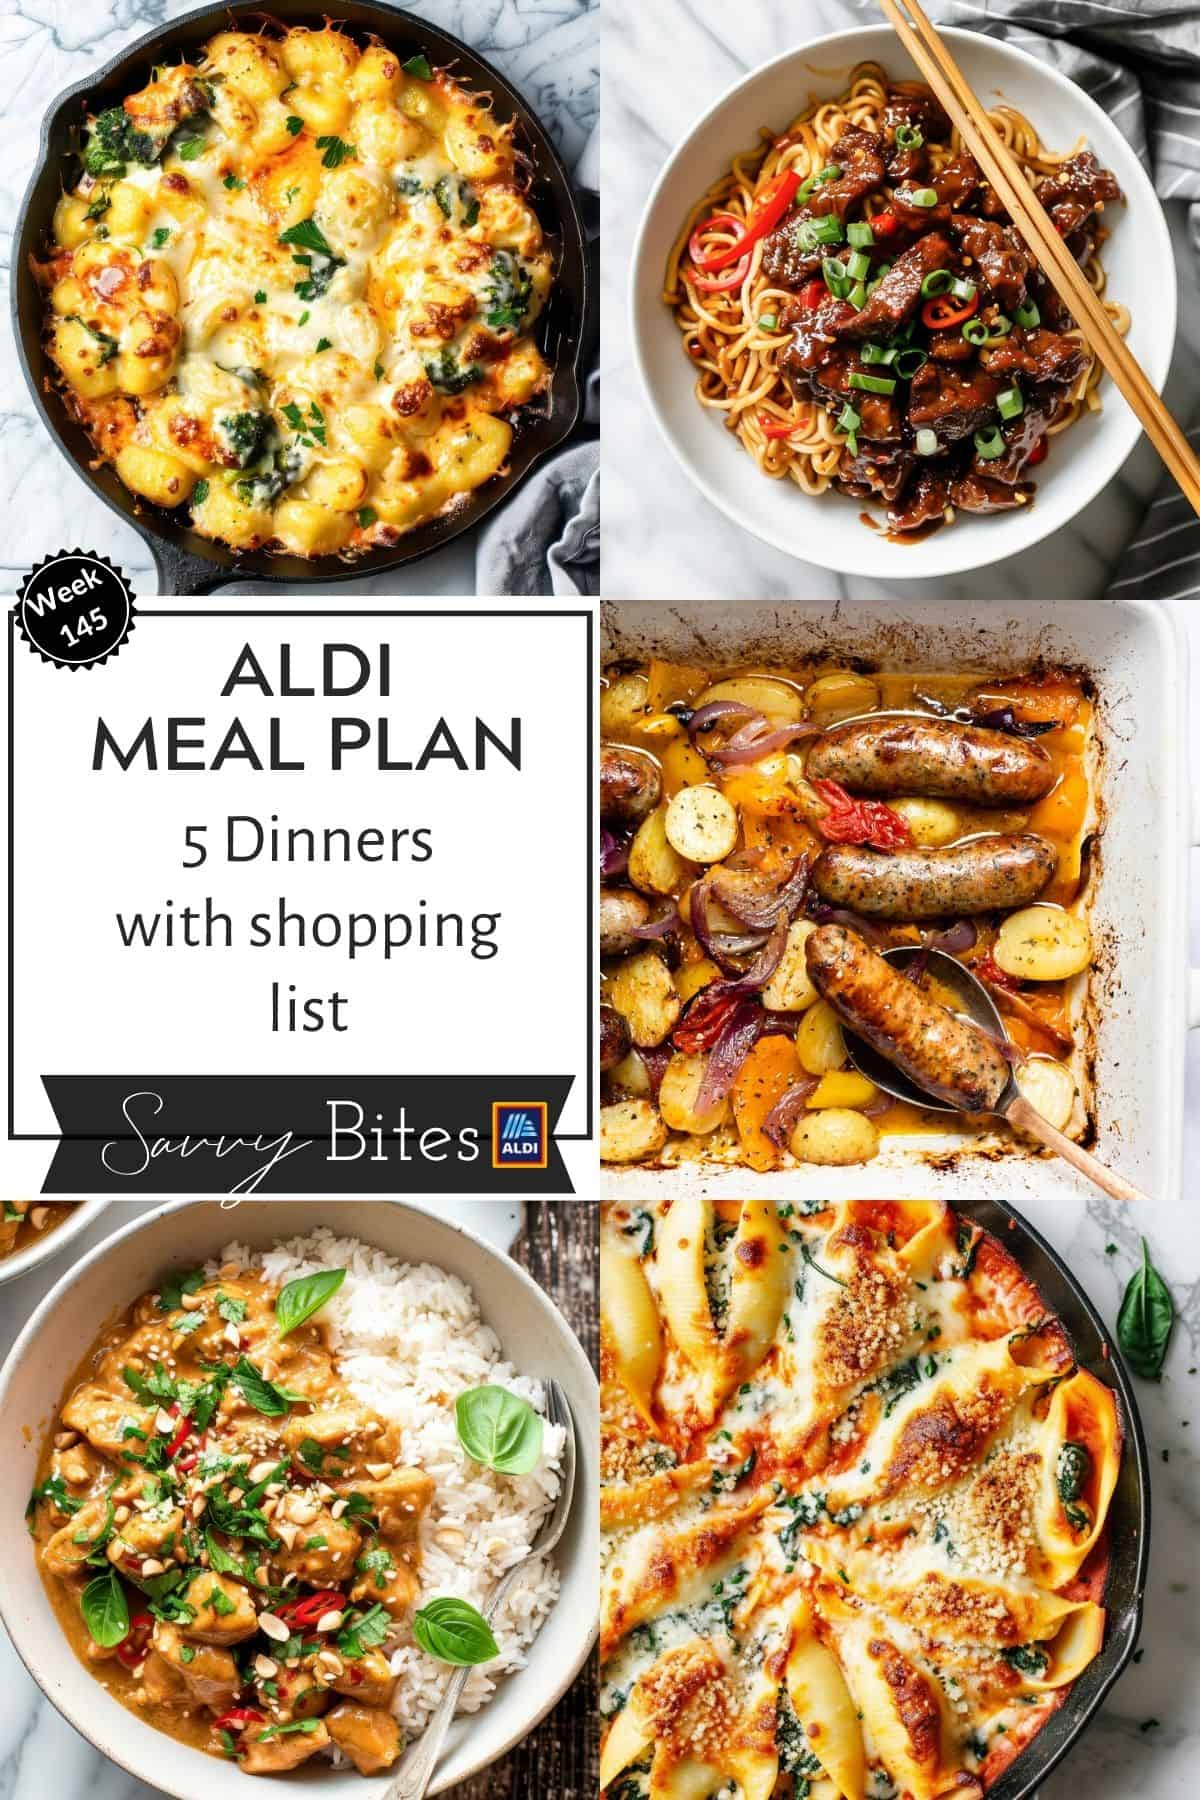 Aldi budget meal plan photo collage with text overlay.